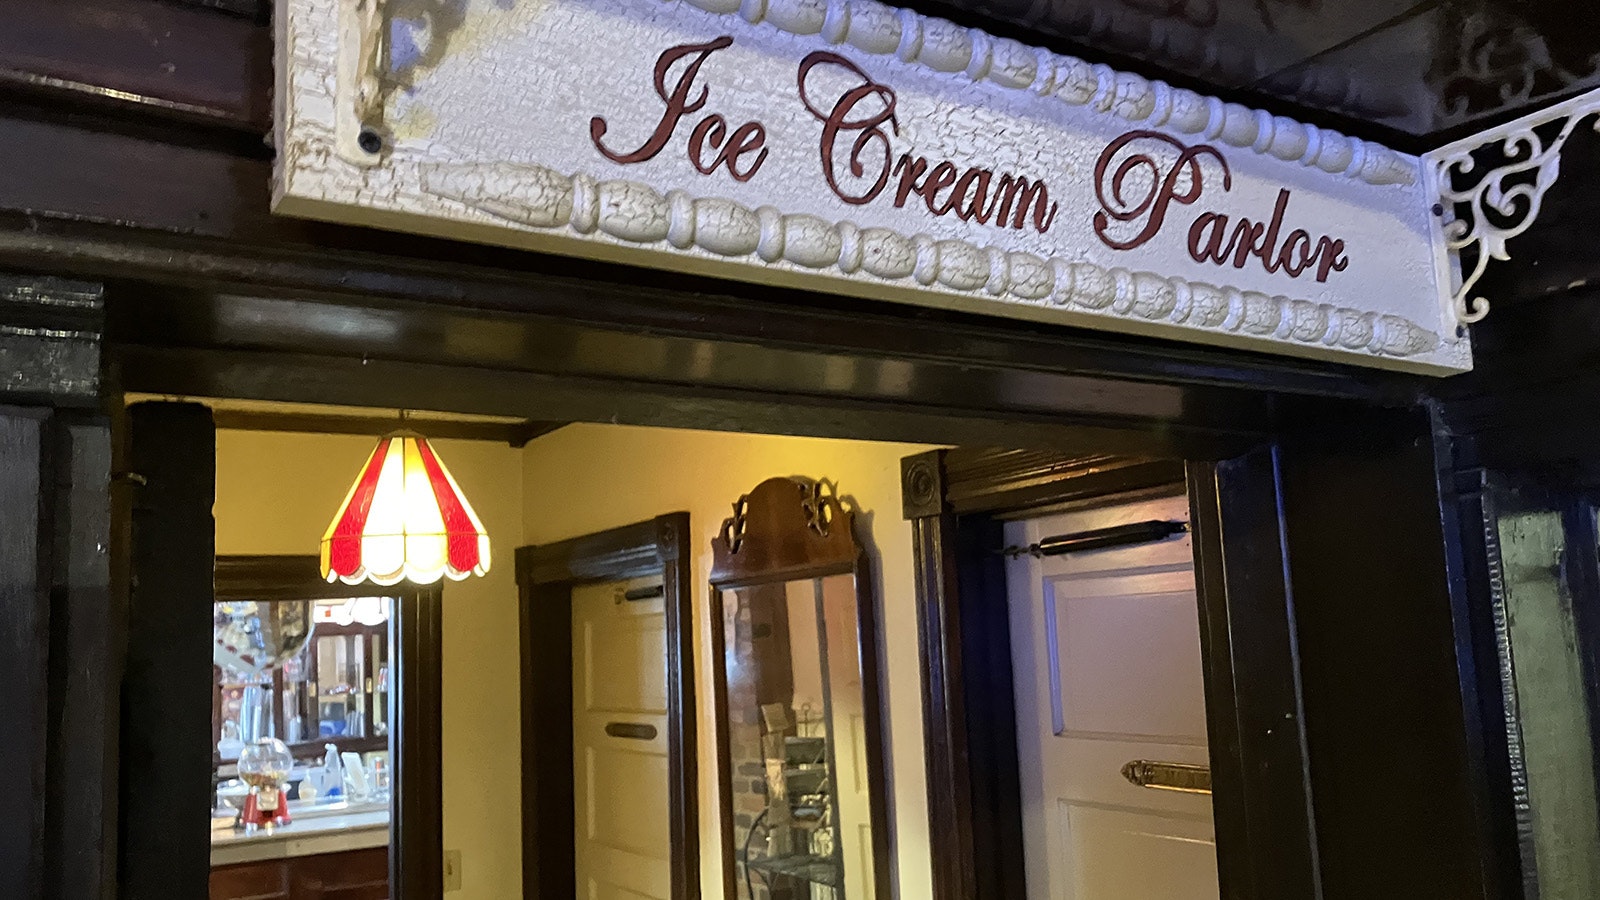 The Plains Ice Cream Parlor in Douglas offers ice cream, sundaes, shakes and more – as well as a flavor of past historic Douglas-area structures woven into its building.